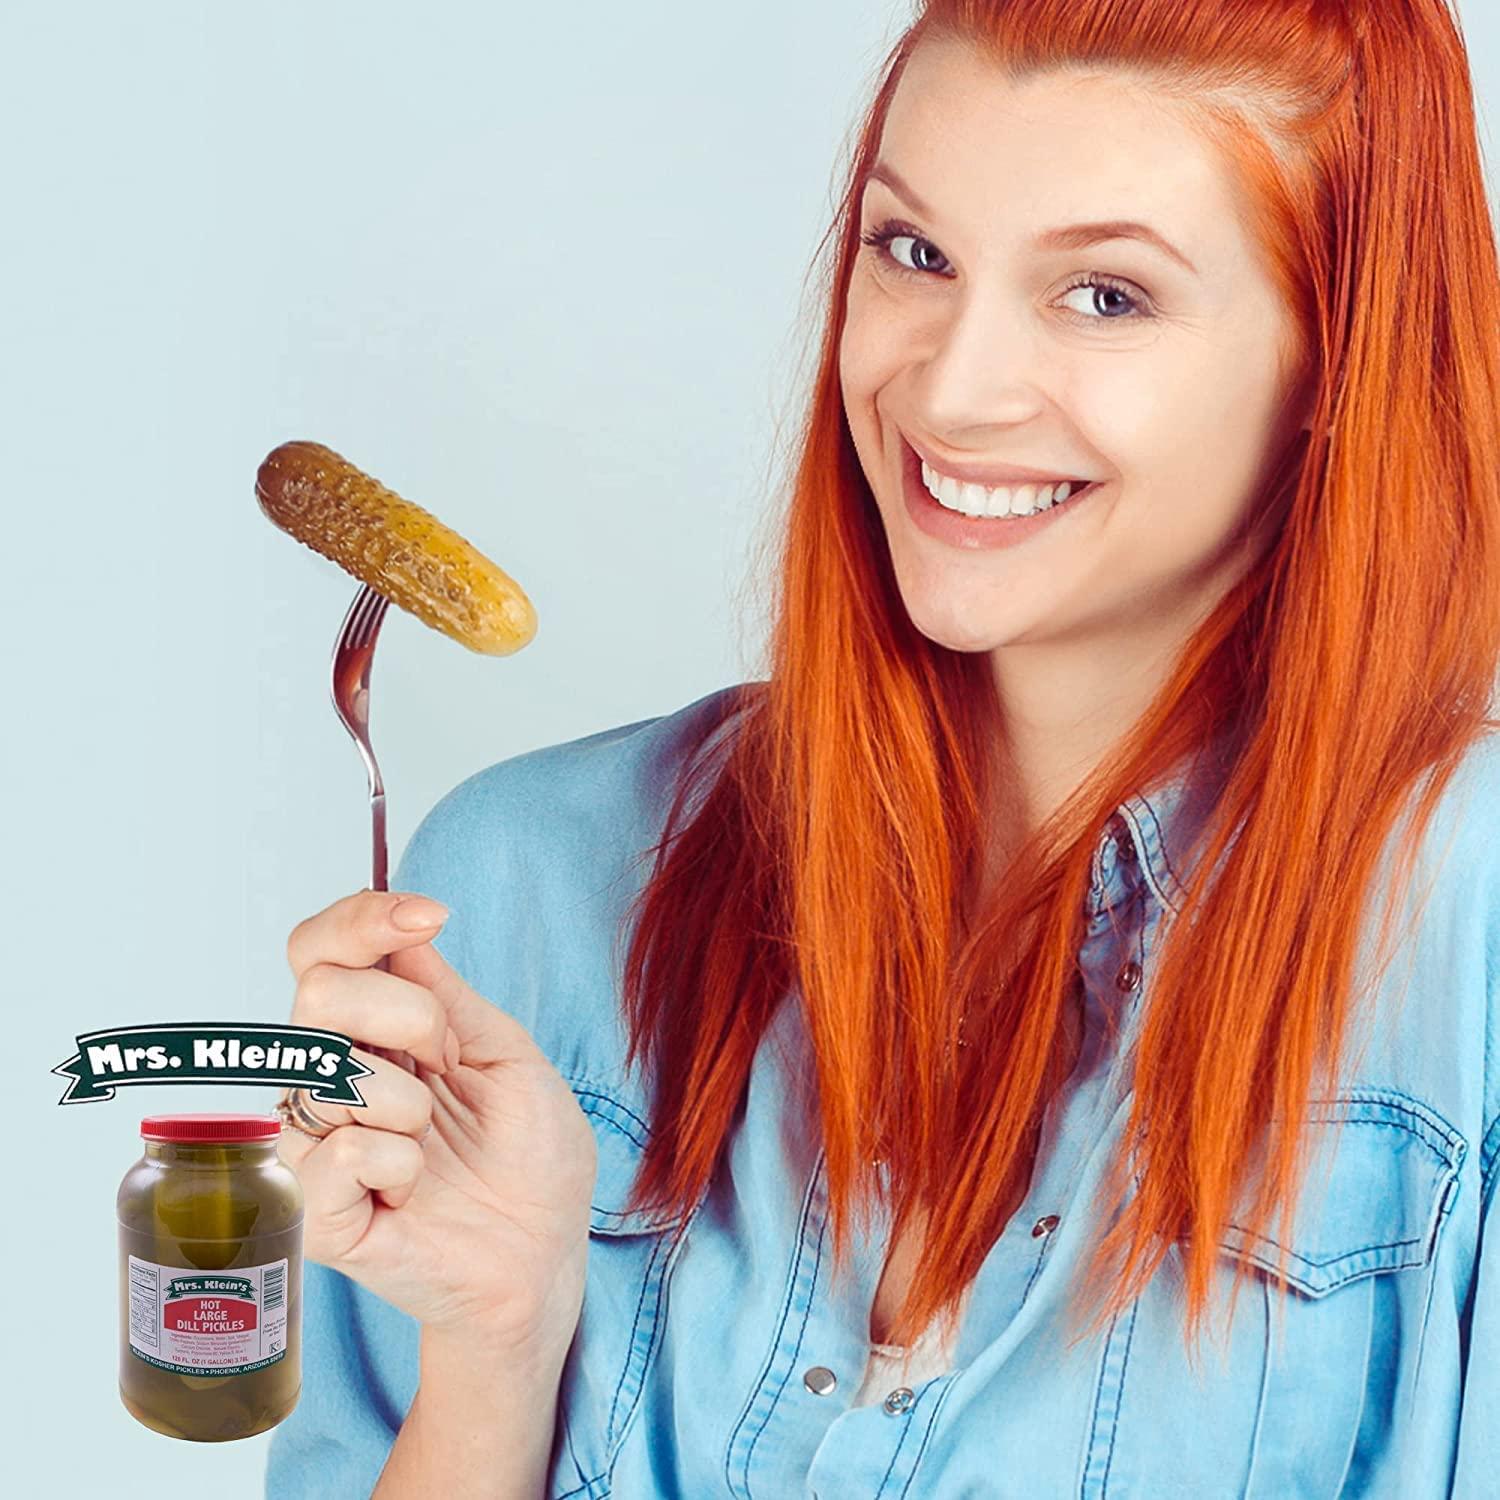  Mrs. Kleins Large Hot Pickles, Bold Spicy Dill Pickle Snack, Spicy Giant Dill Pickles Made with Natural Ingredients, Kosher, Low Carb,  Gluten Free & Vegan